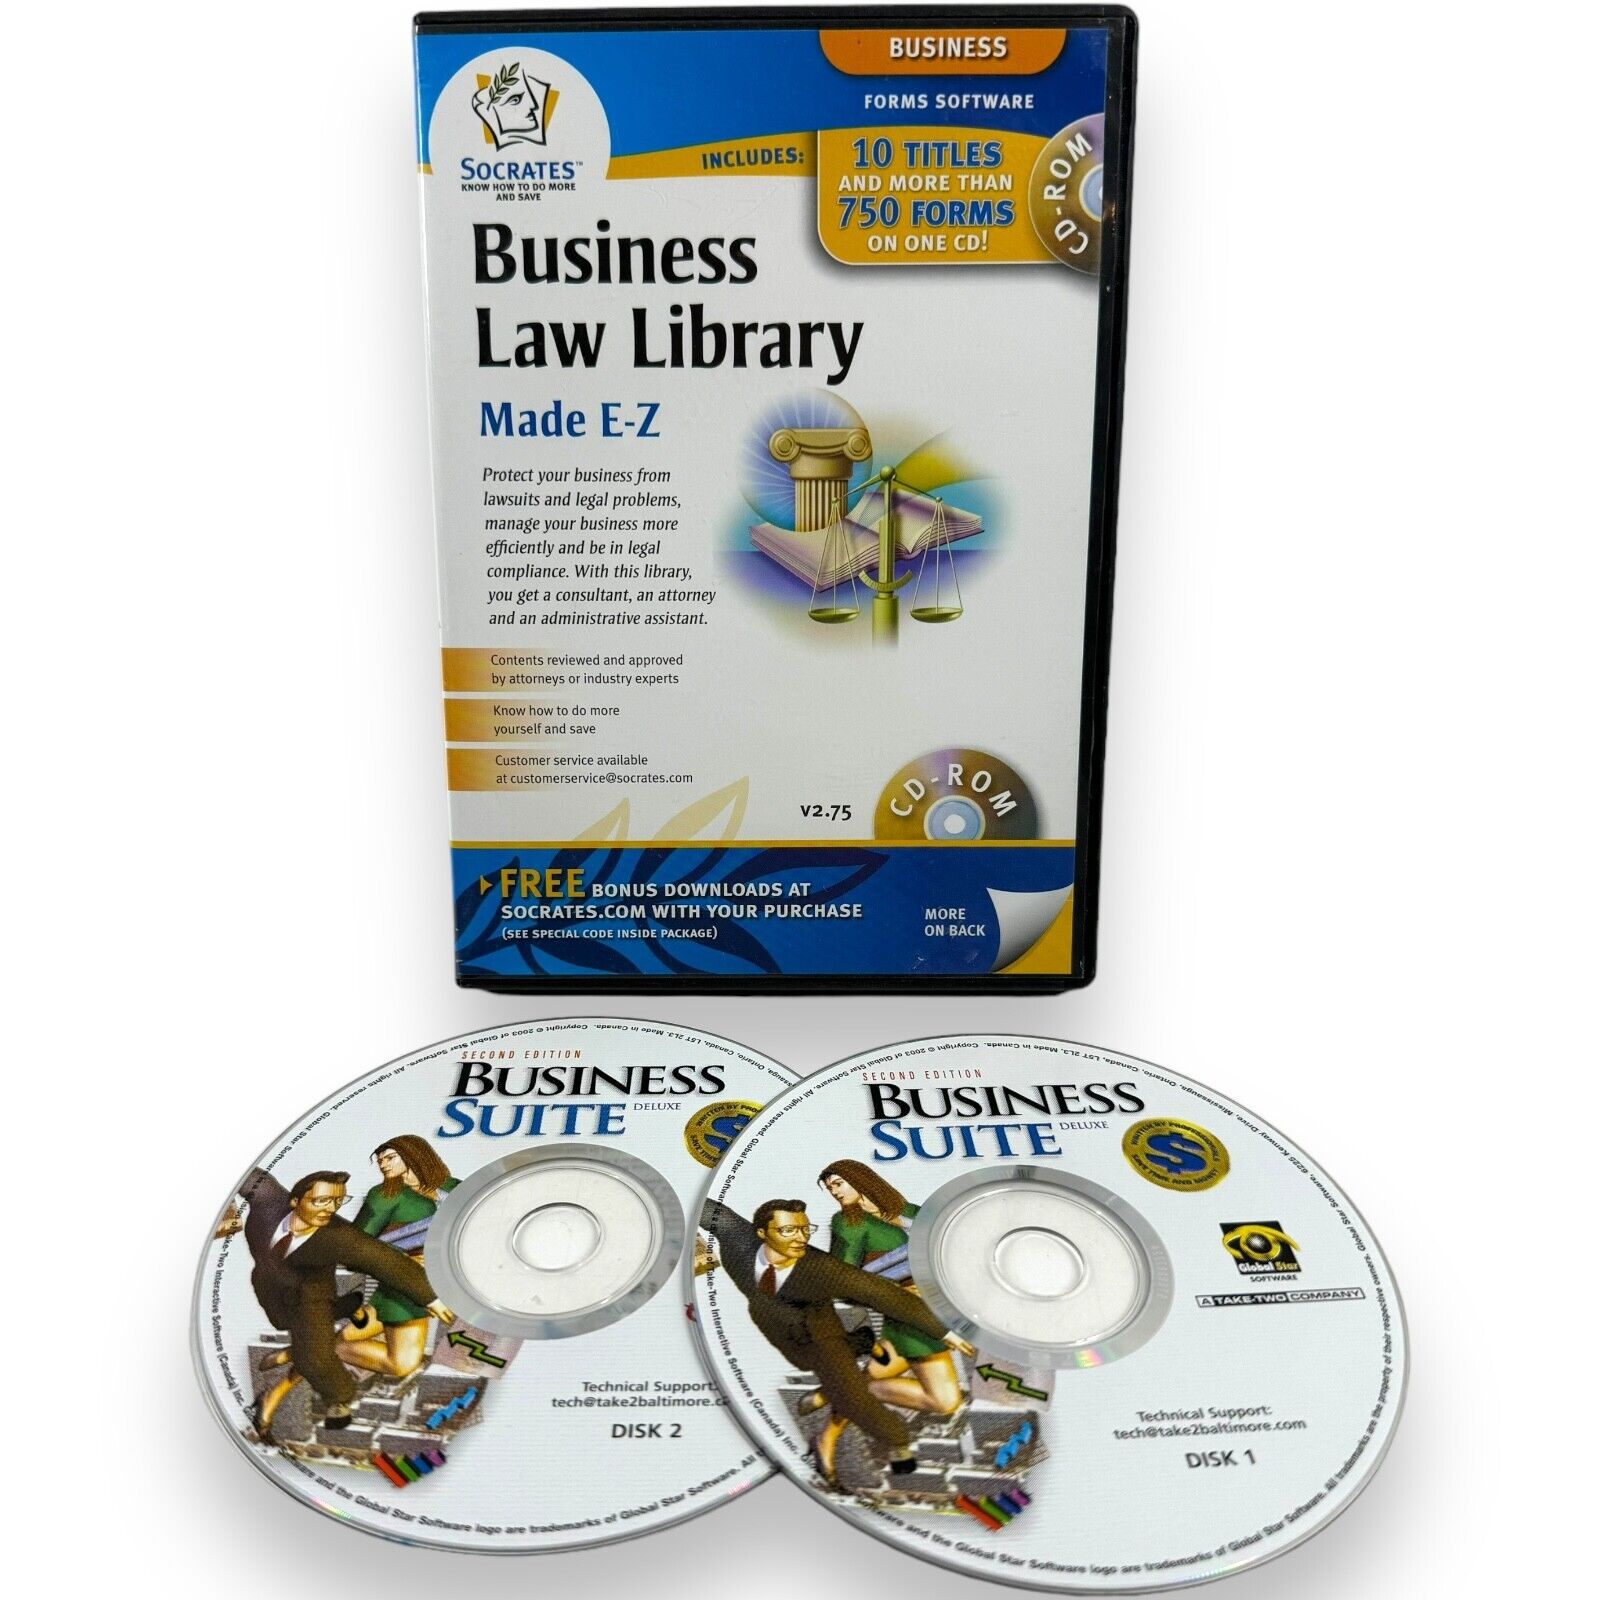 Socrates Business Law Library Made E-Z Business Kit 2004 with Business Suite